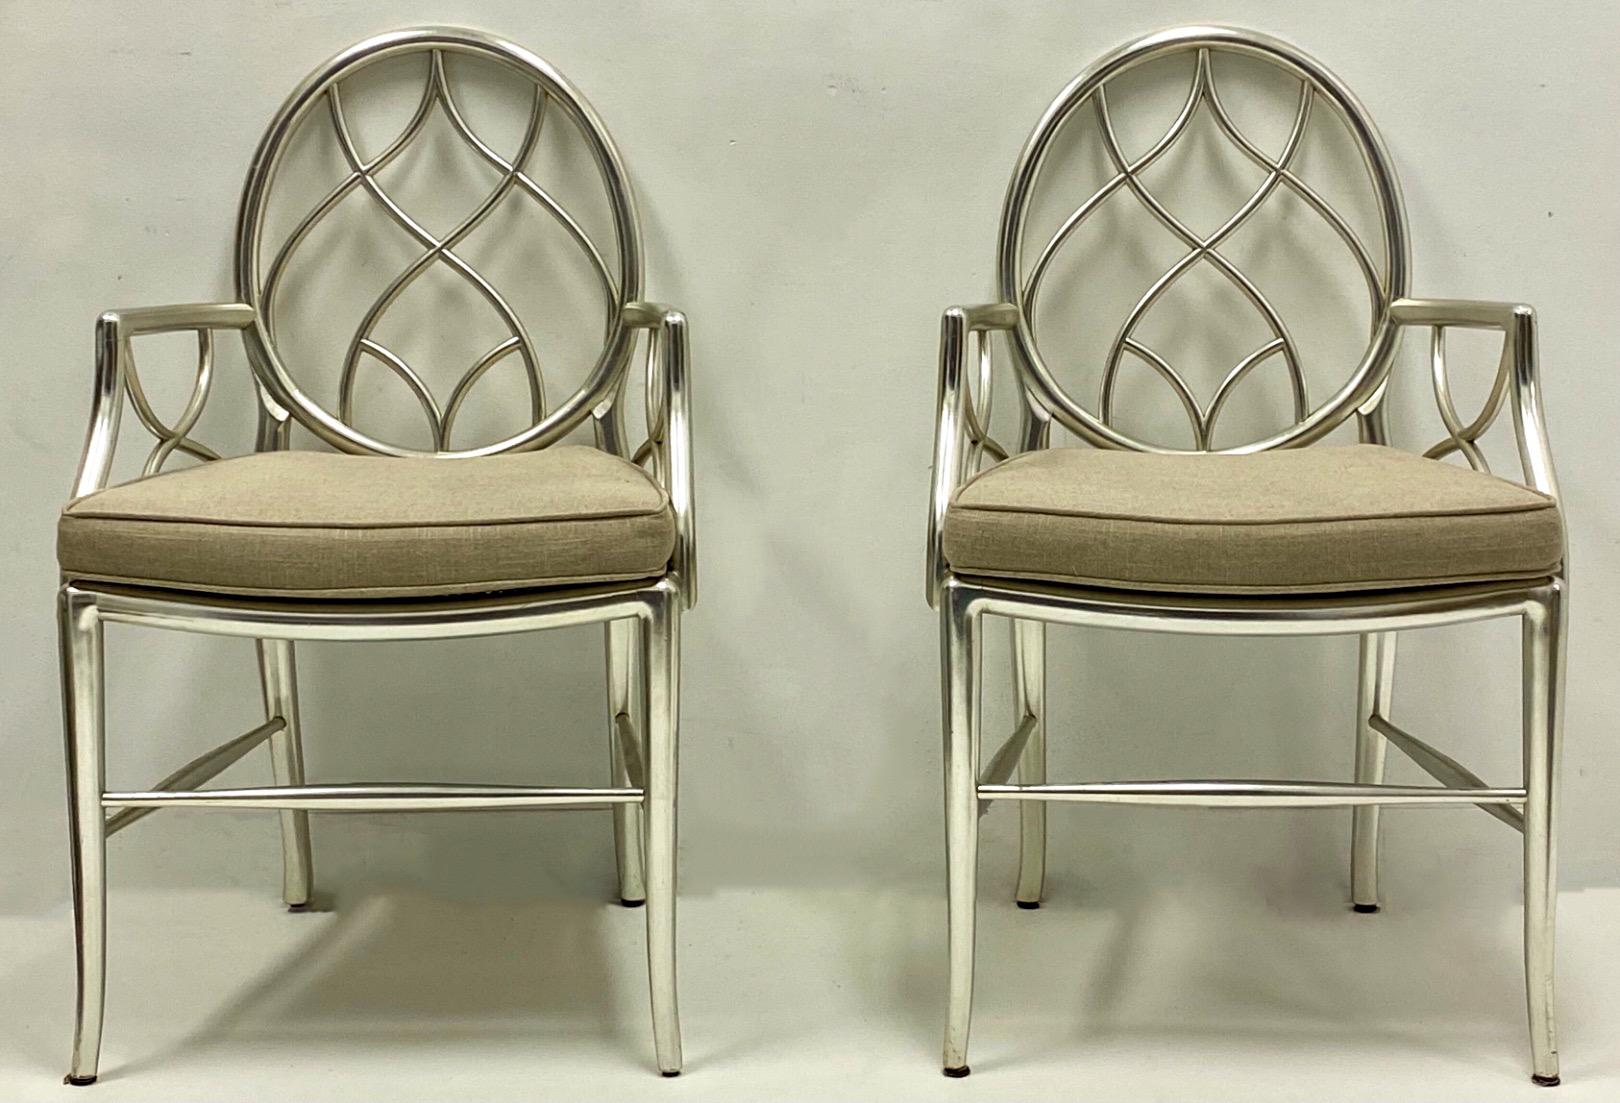 1970s Italian Neo-Classical Style Silver Leaf Bergere Chairs, a Pair In Good Condition For Sale In Kennesaw, GA